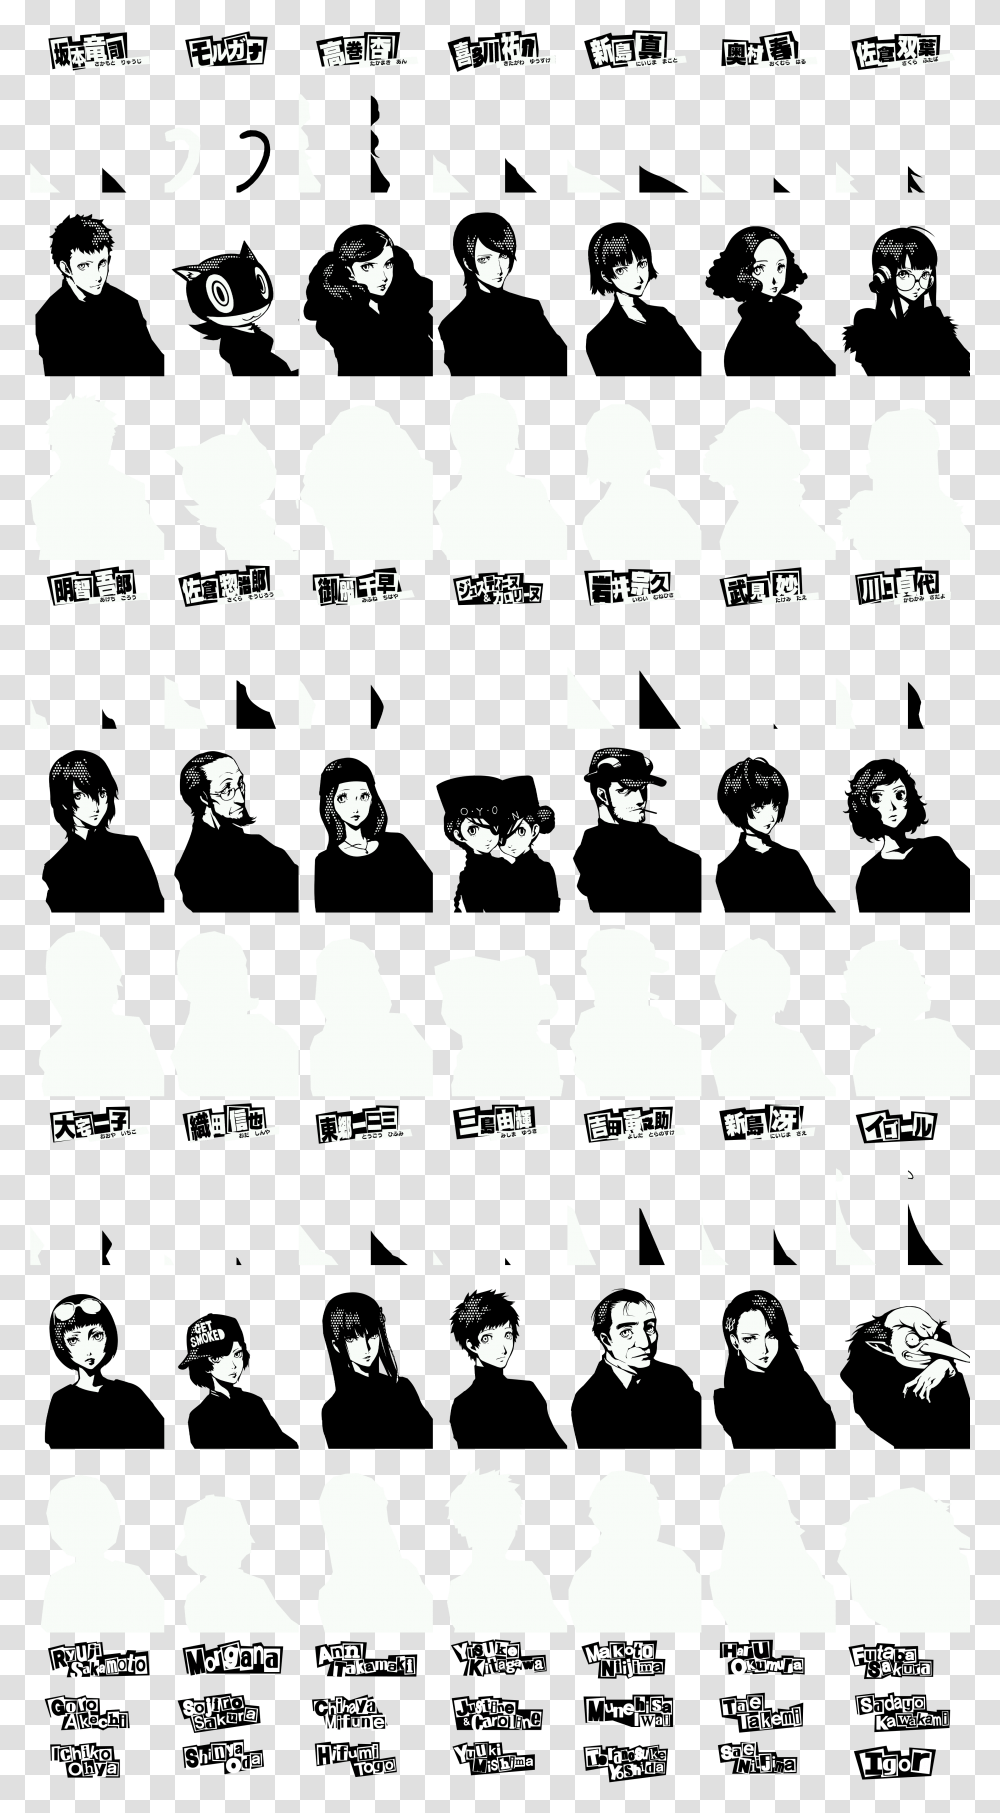 Playstation 3 Persona 5 Confidant Icons The Spriters All Persona 5 Confidant, Silhouette, Word, Railing, Text Transparent Png